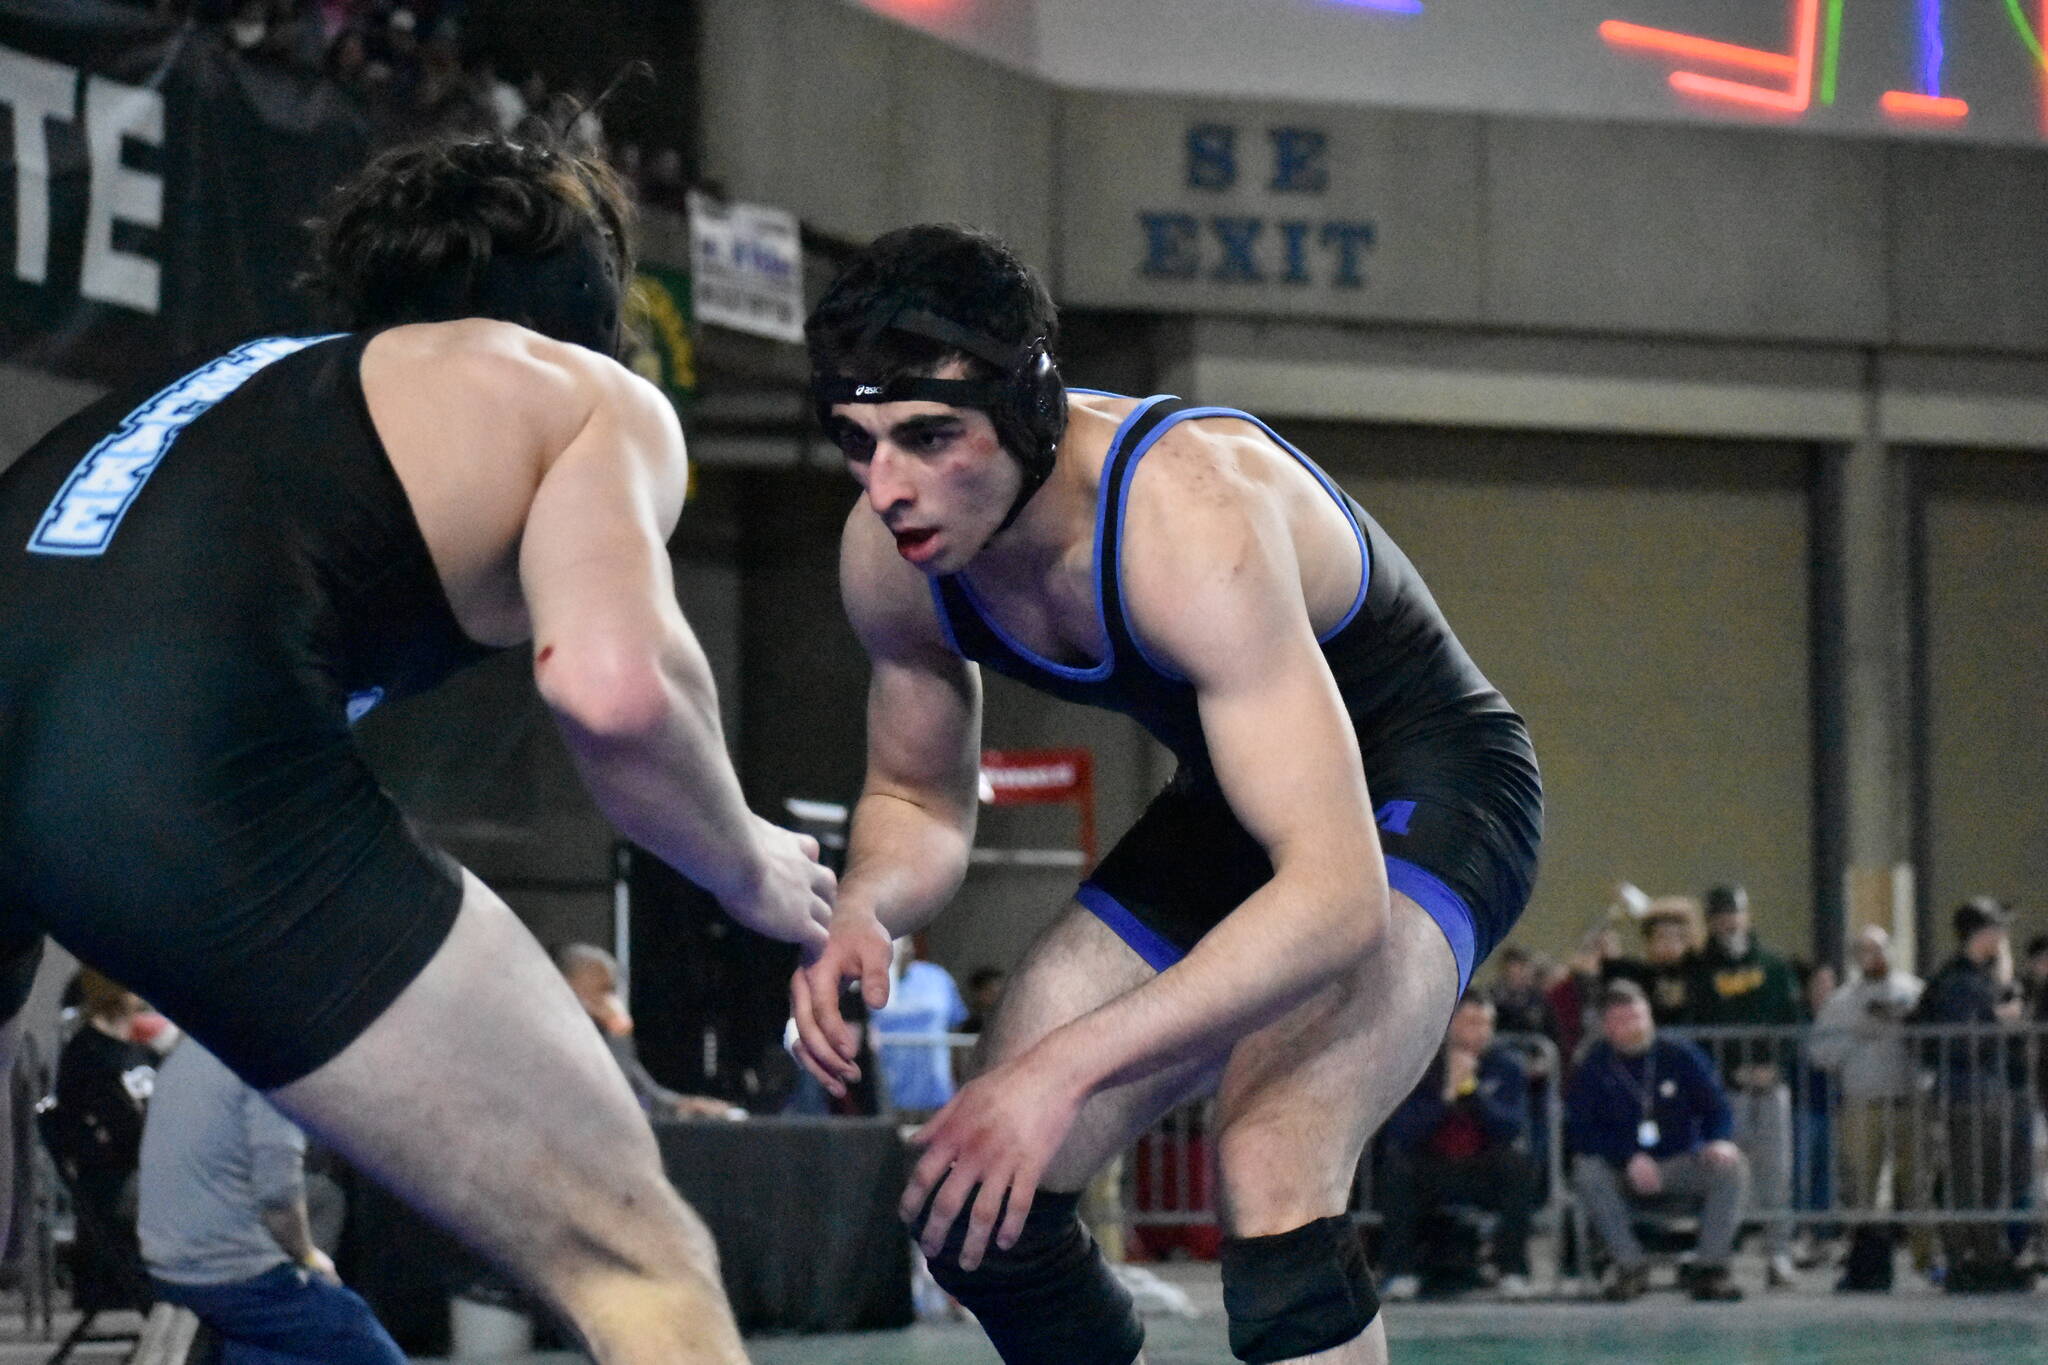 Ramazan Foldov of Kent-Meridian sizes up his opponent on the second day of the state tournament. Photos by Ben Ray/The Reporter